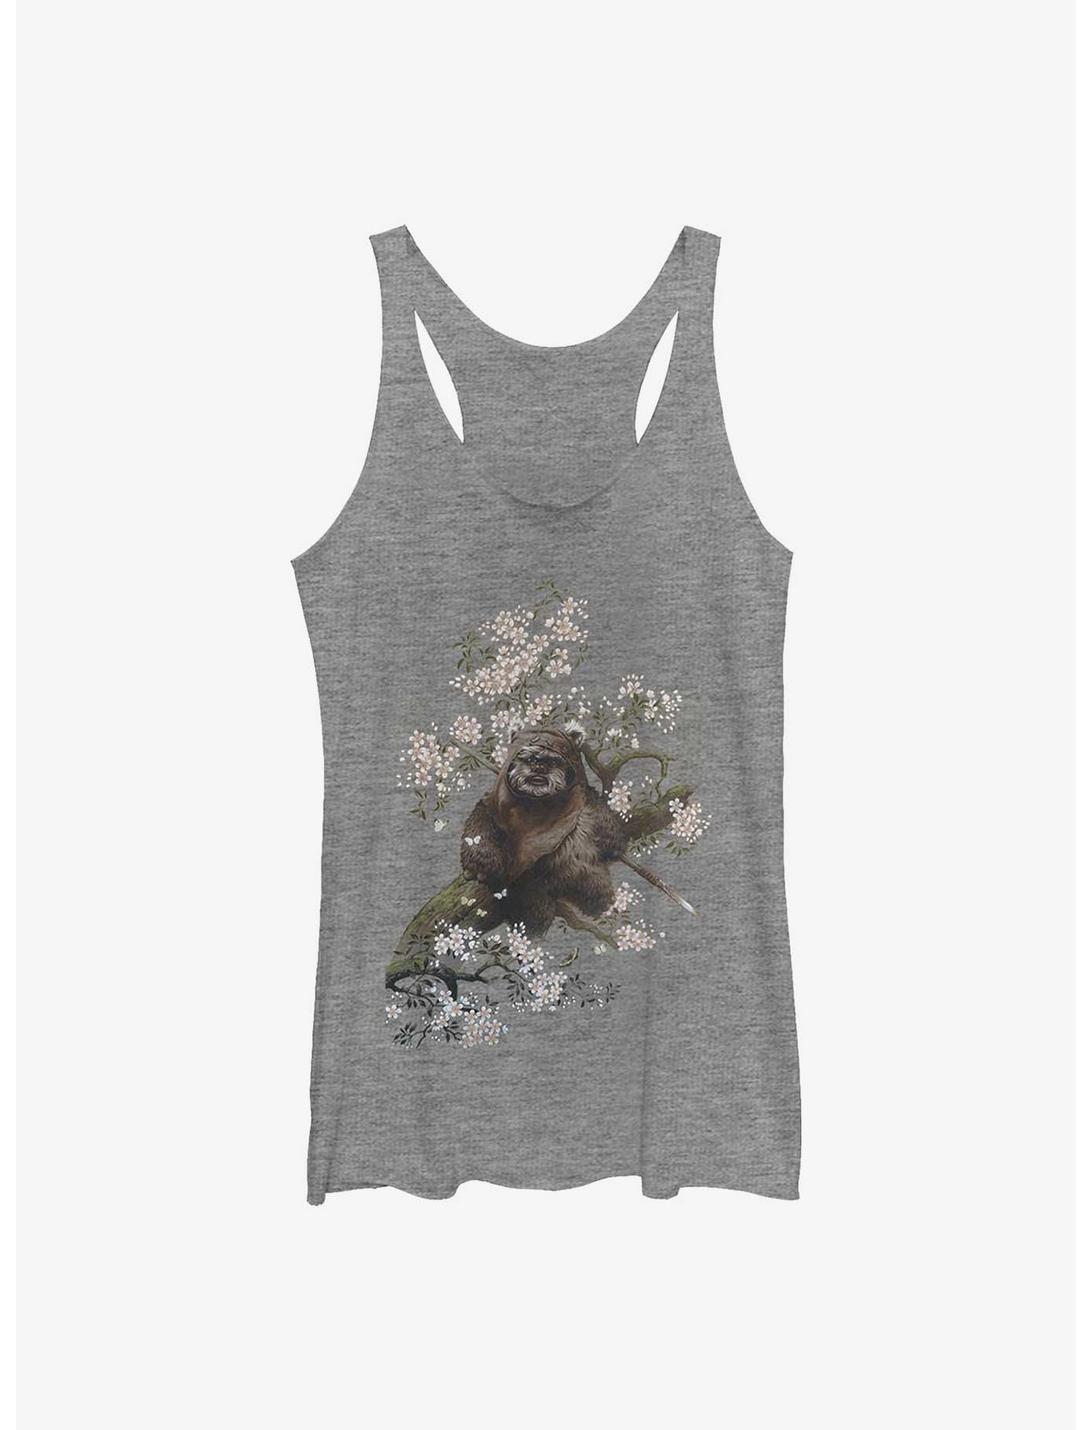 Star Wars Ewok In The Flowers Womens Tank Top, GRAY HTR, hi-res